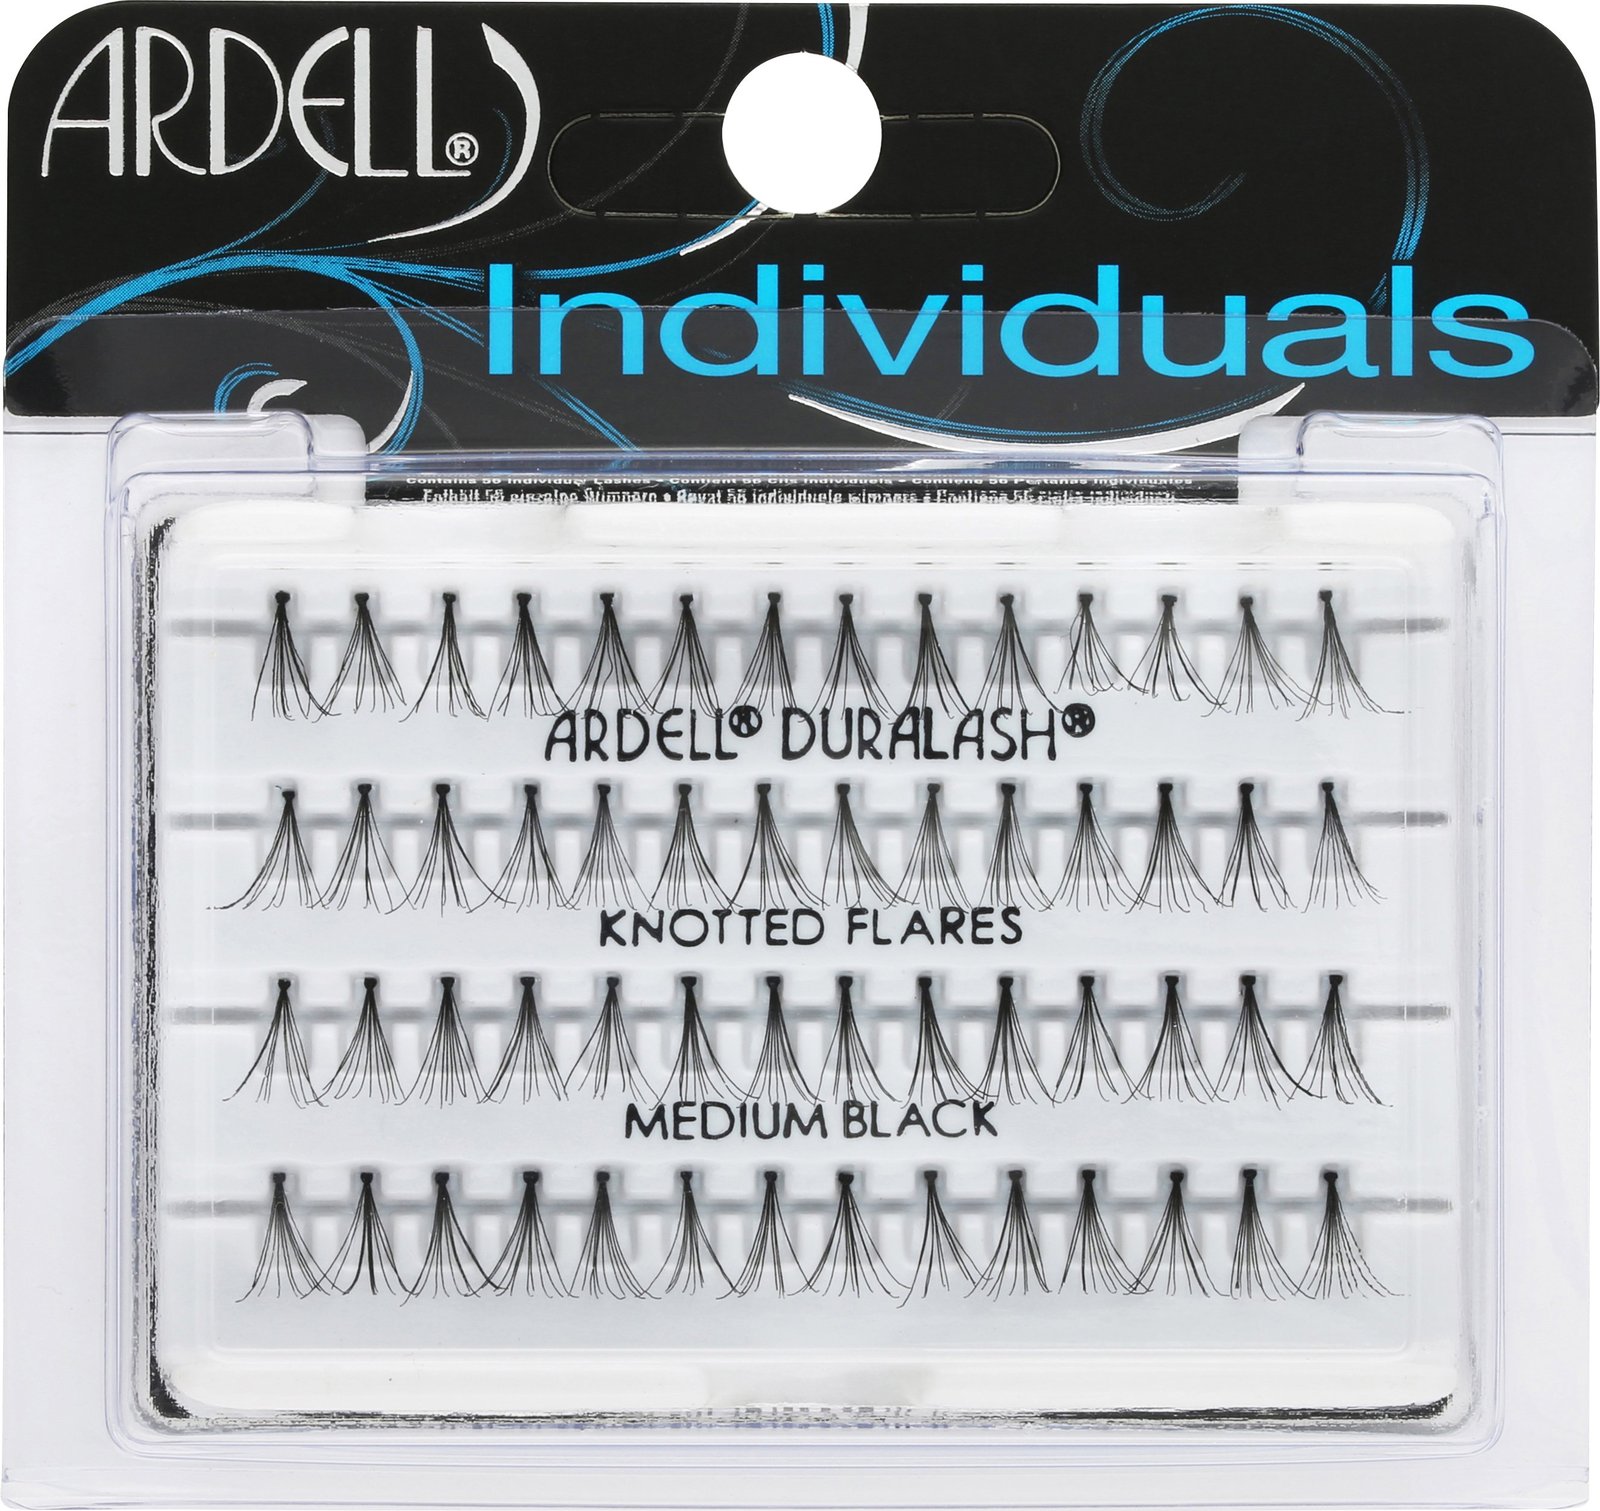 ARDELL Individuals DuraLash Knotted Flares Medium 56 st